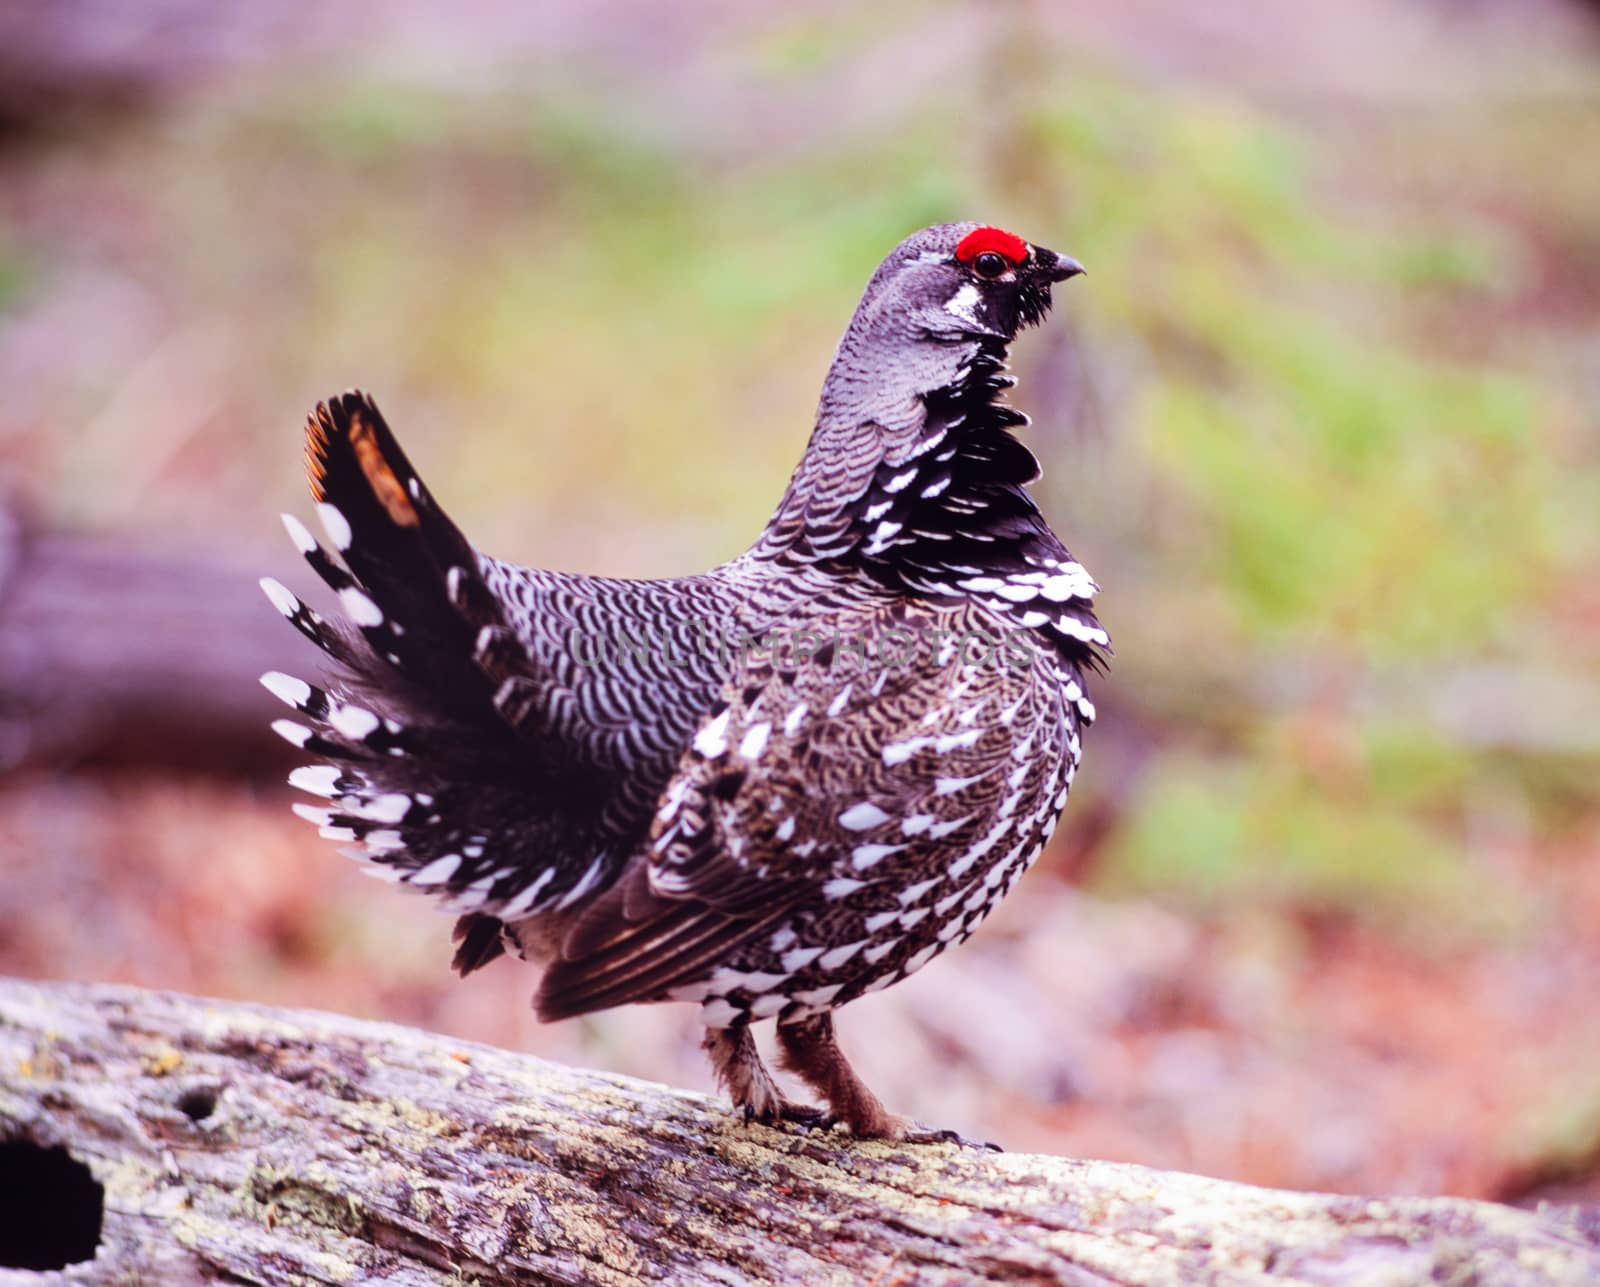 Male Spruce Grouse Dendragapus canadensis posing by PiLens